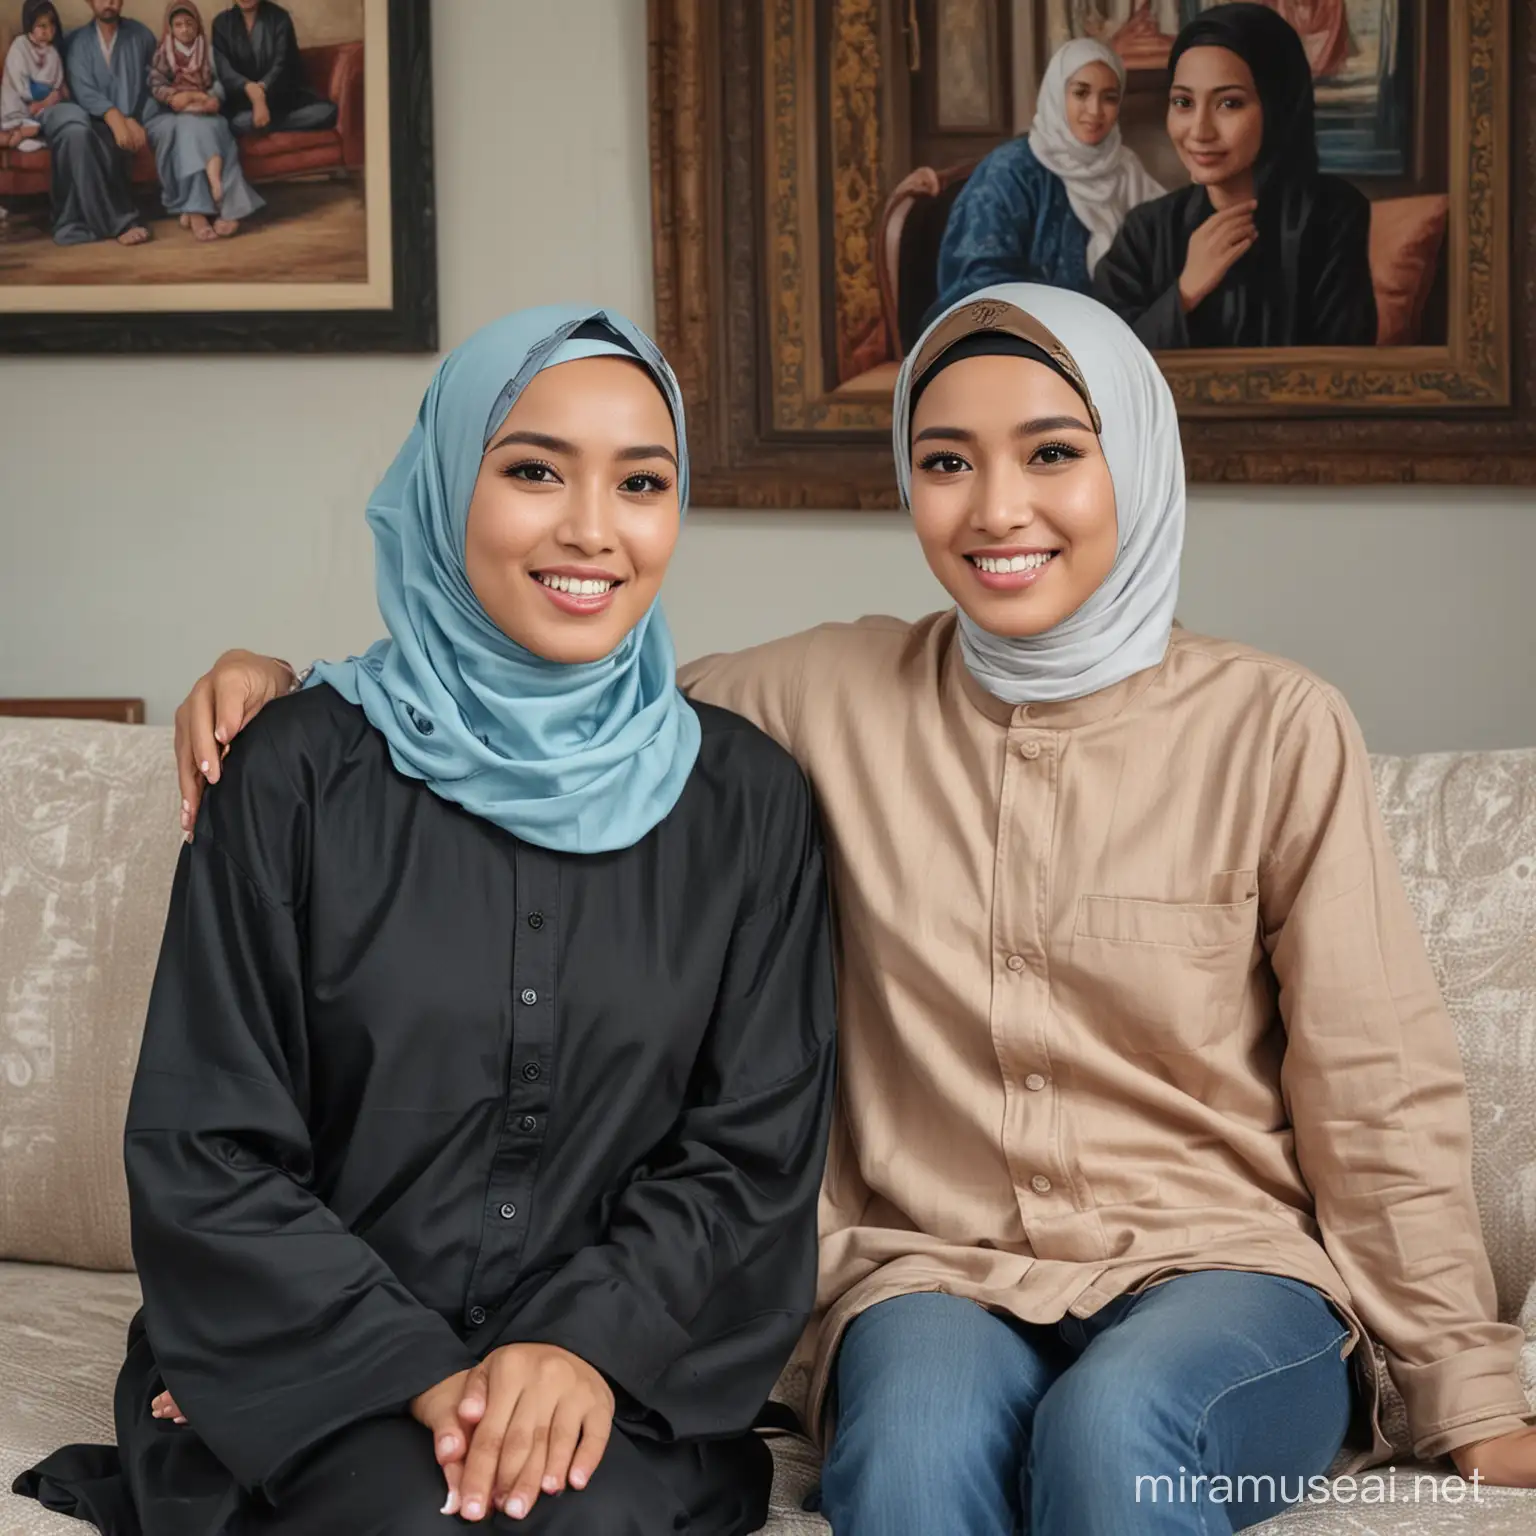 
A man with an Indonesian face, thin hair, 30 years old, wearing a black shirt and blue jeans, a woman aged 30, wearing a hijab, wearing a robe, sitting on a sofa with a painting in the background depicting the two of them. Full HD original photo